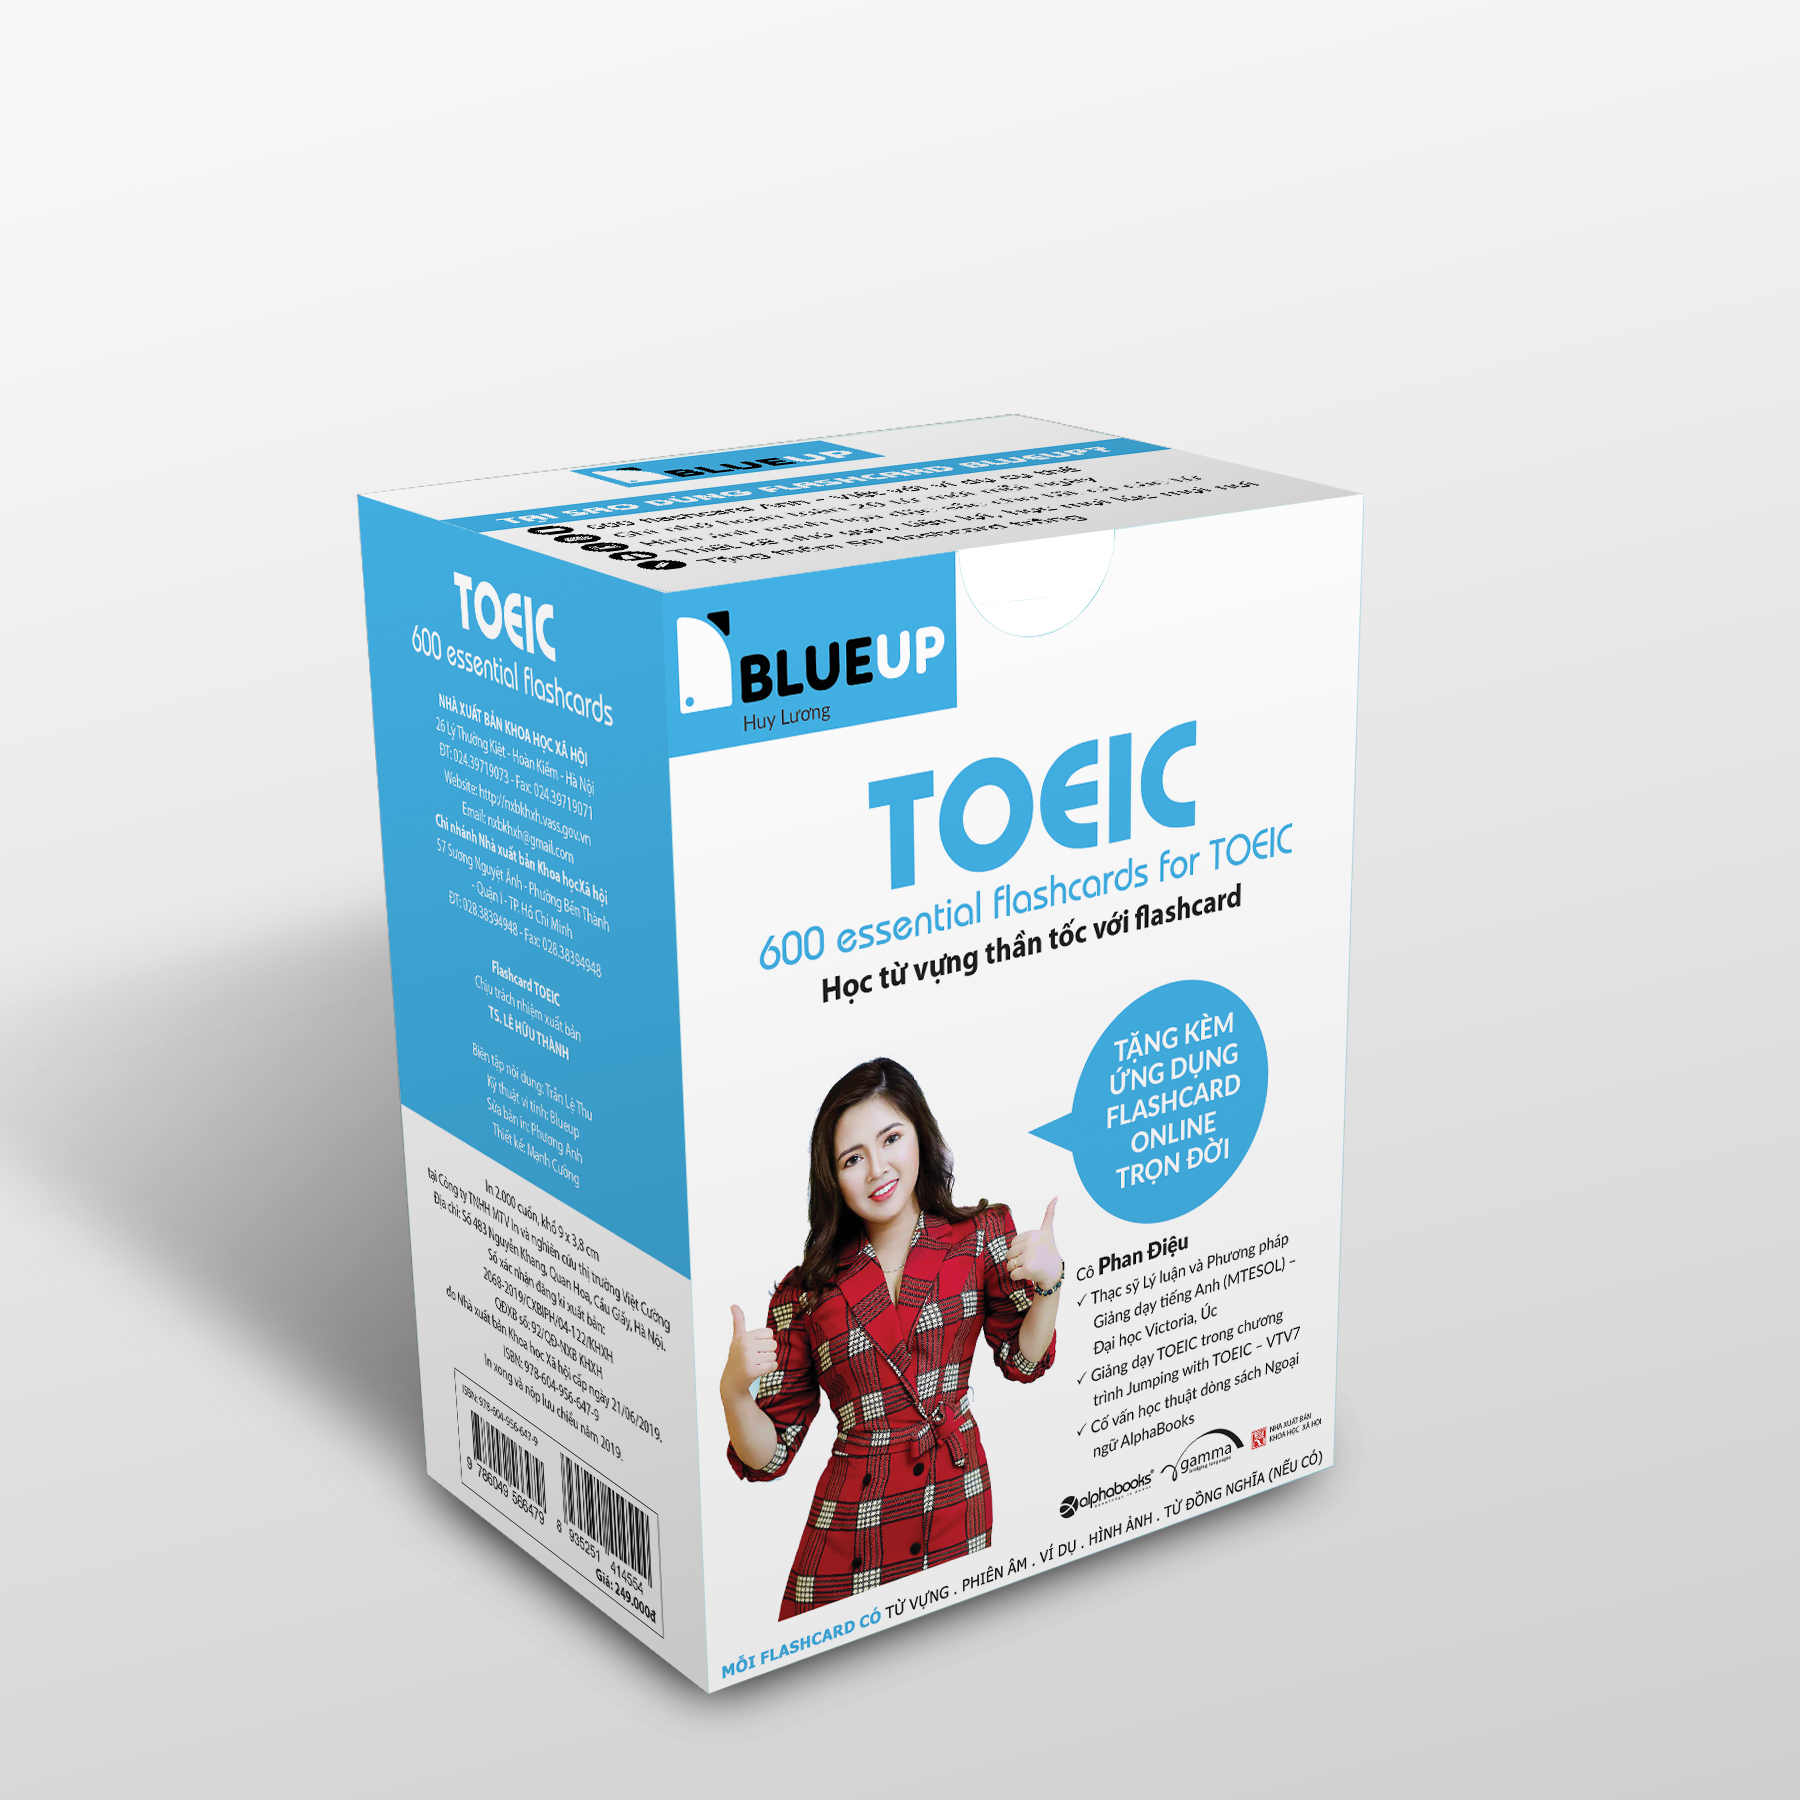 Blue Up - 600 Essential Flashcards For Toeic PDF